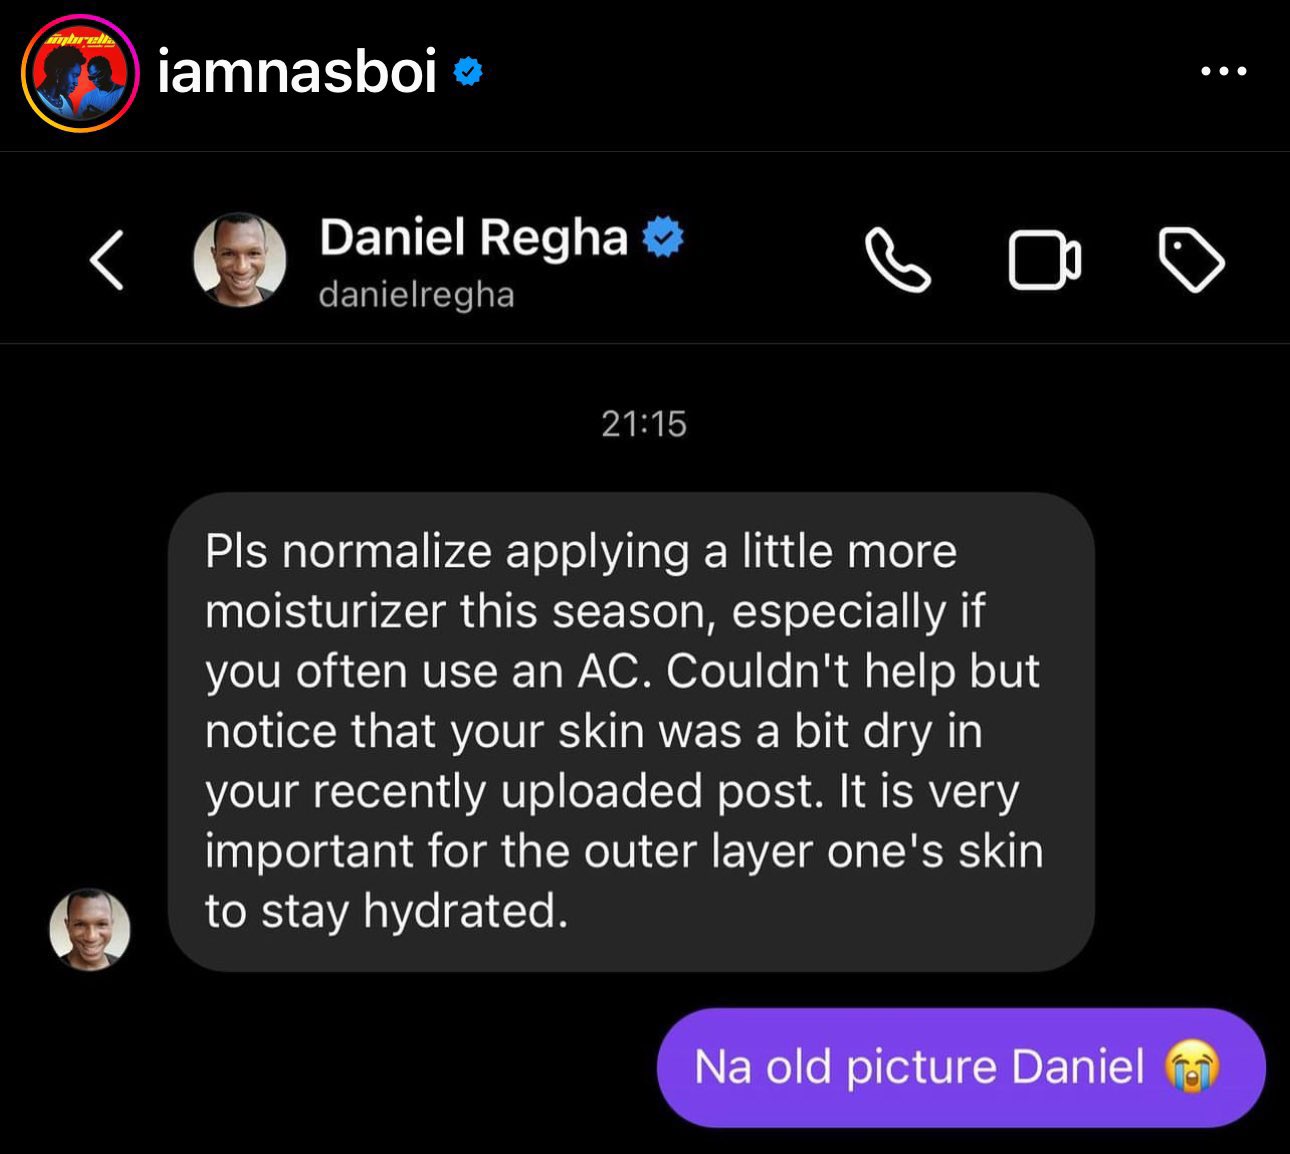 Controversial Twitter personality, Daniel Regha has given his two cents on how skitmaker, Nasboi can take care of his skin this season. Daniel Regha, who is known for not minding his business, advised Nasboi to take care of his skin in his recently uploaded photo. Daniel Regha Daniel Regha Daniel sent a direct message to Nasboi, advising him to use moisturizer as his skin was a bit dry. He went on to stress how crucial it is to maintain hydration of the skin’s outer layer. Sharing a screenshot of their conversation, Nasboi informed Daniel that it was an old picture.